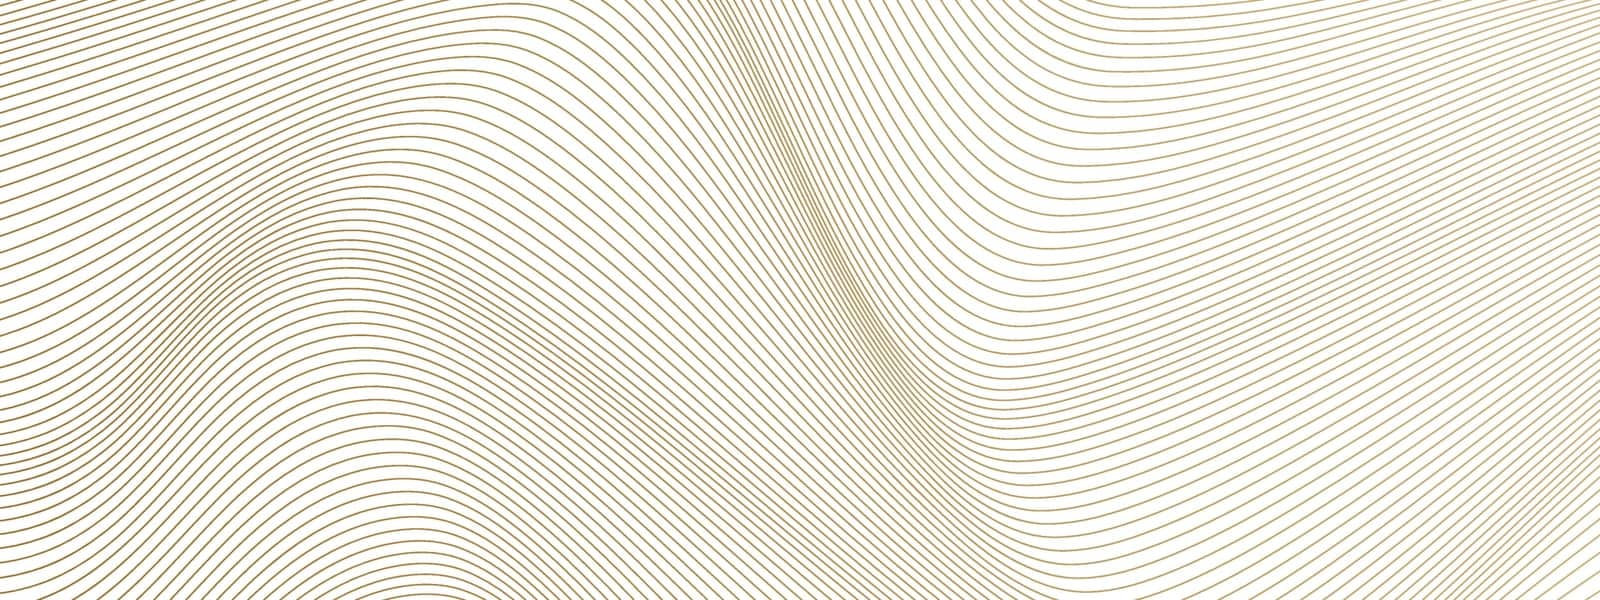 abstract background with wavy golden lines. Vector illustration